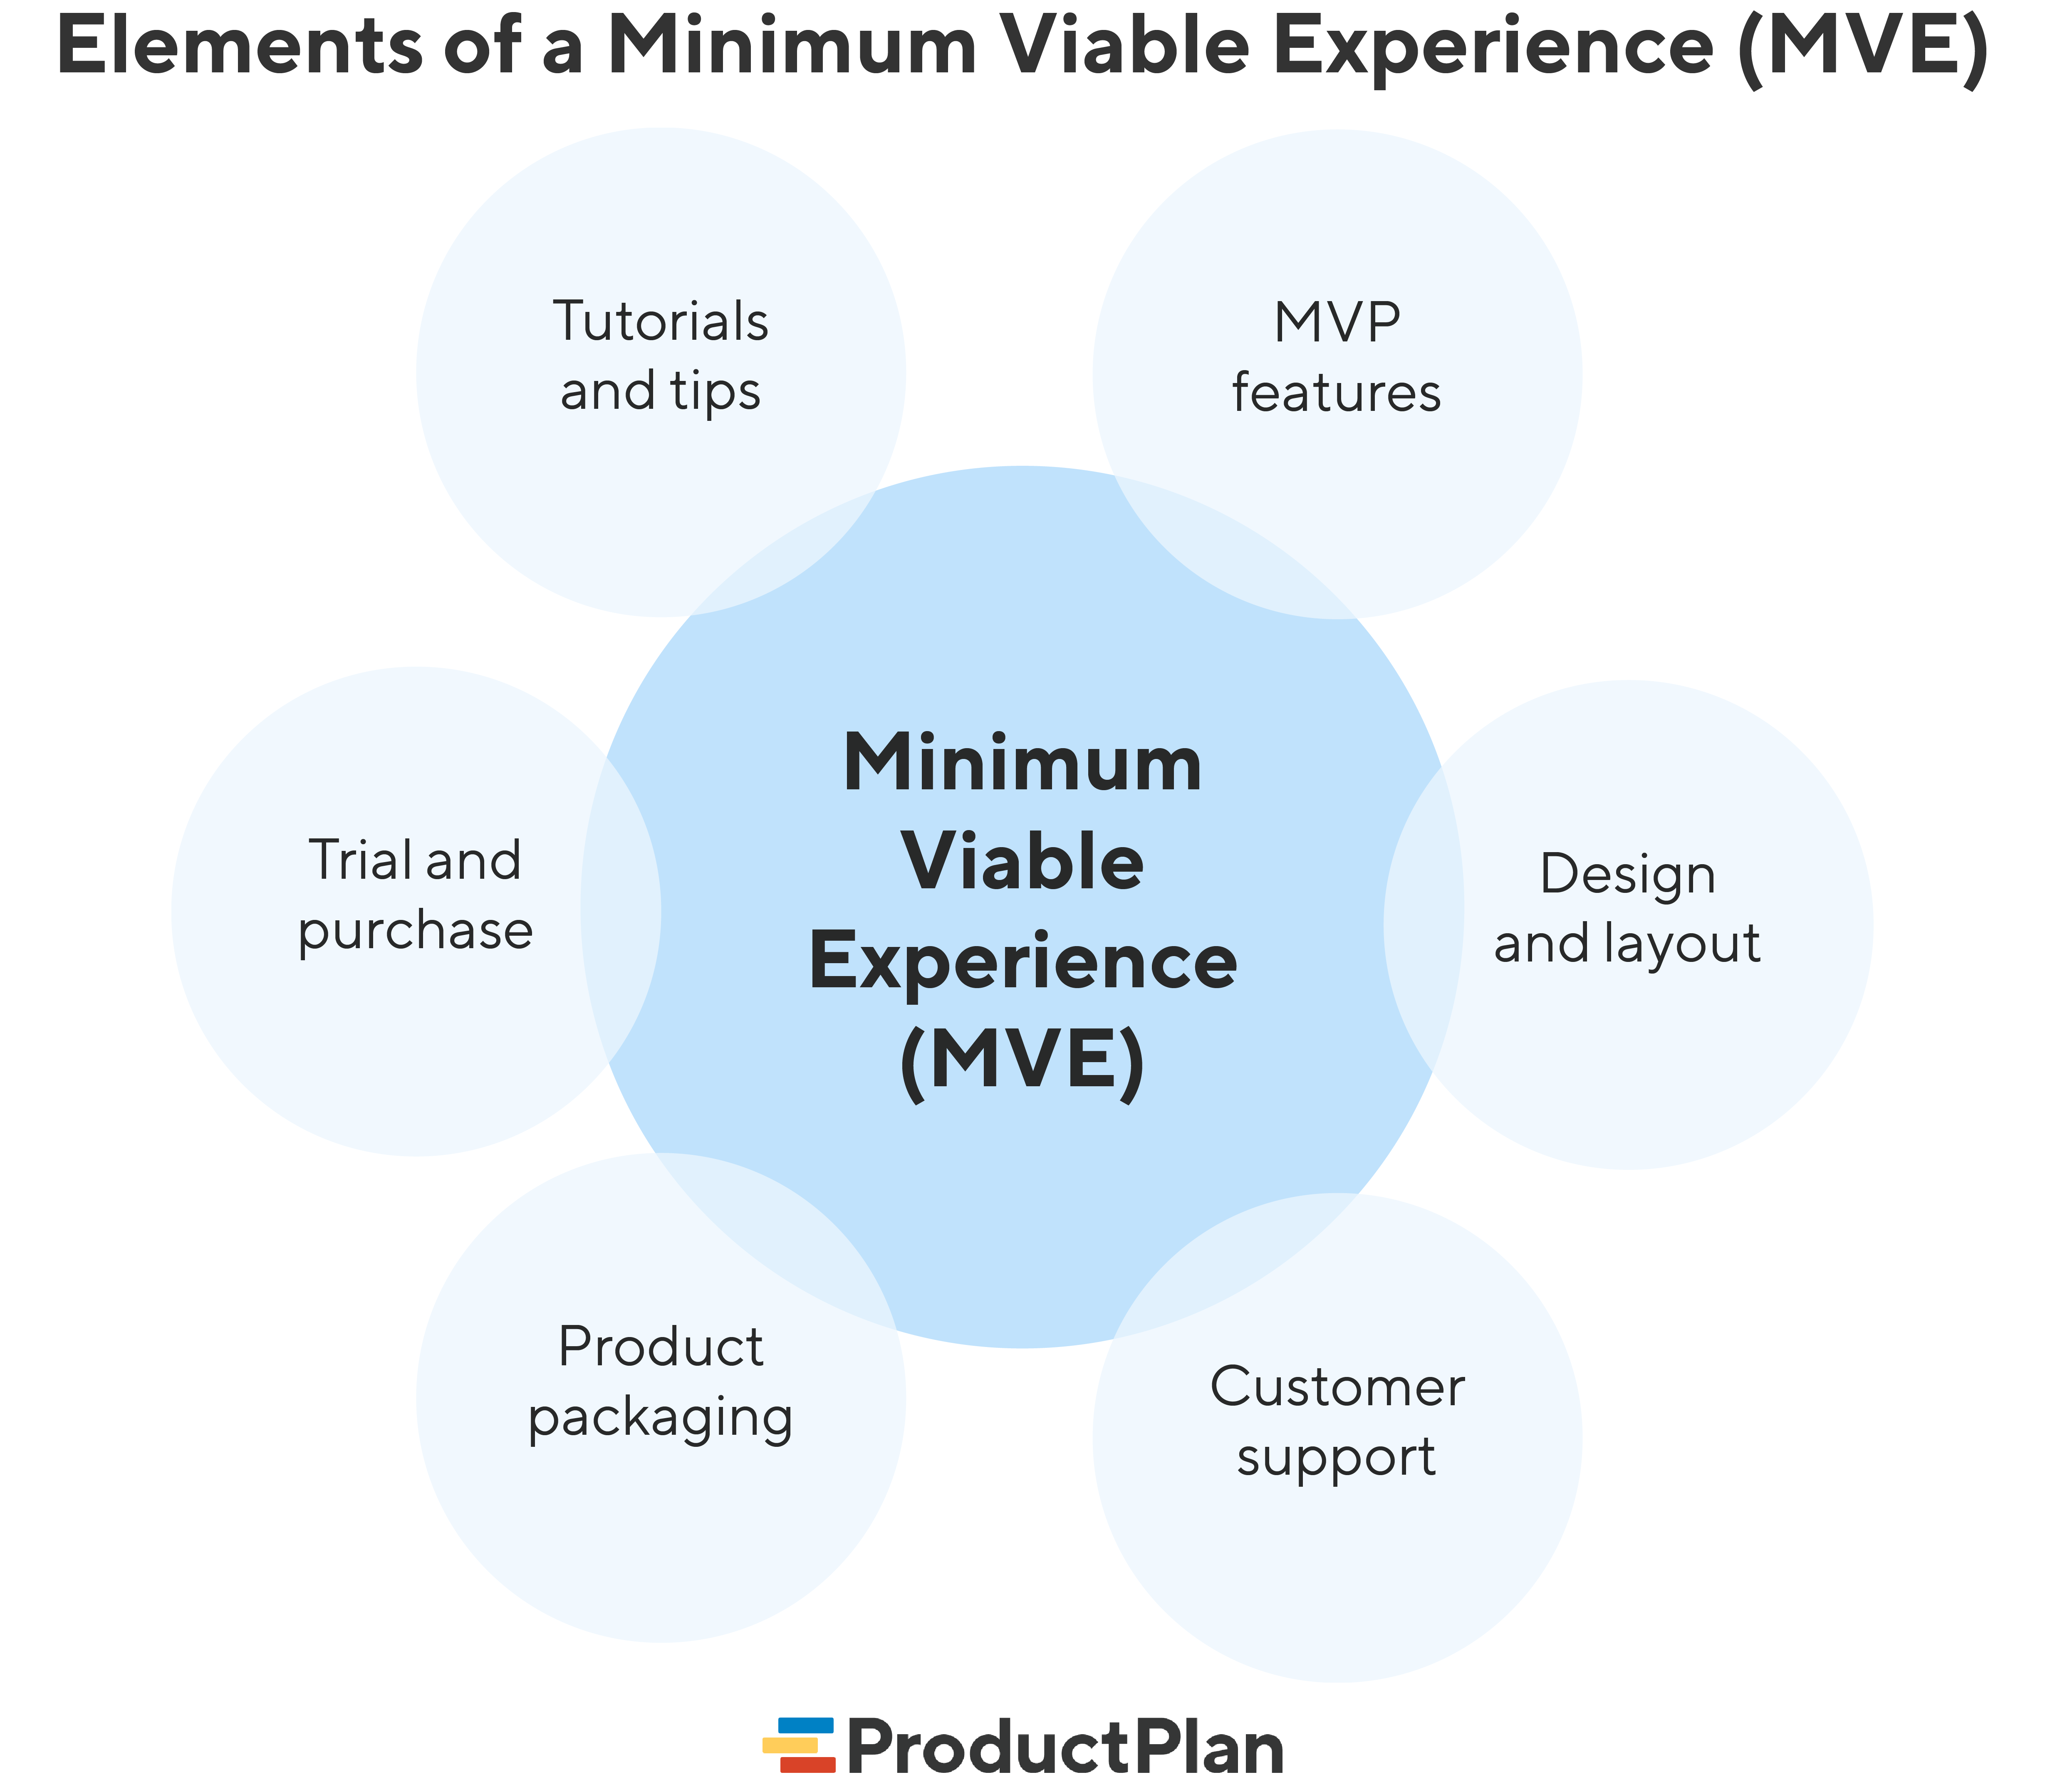 Elements of a Minimal Viable Experience | ProductPlan